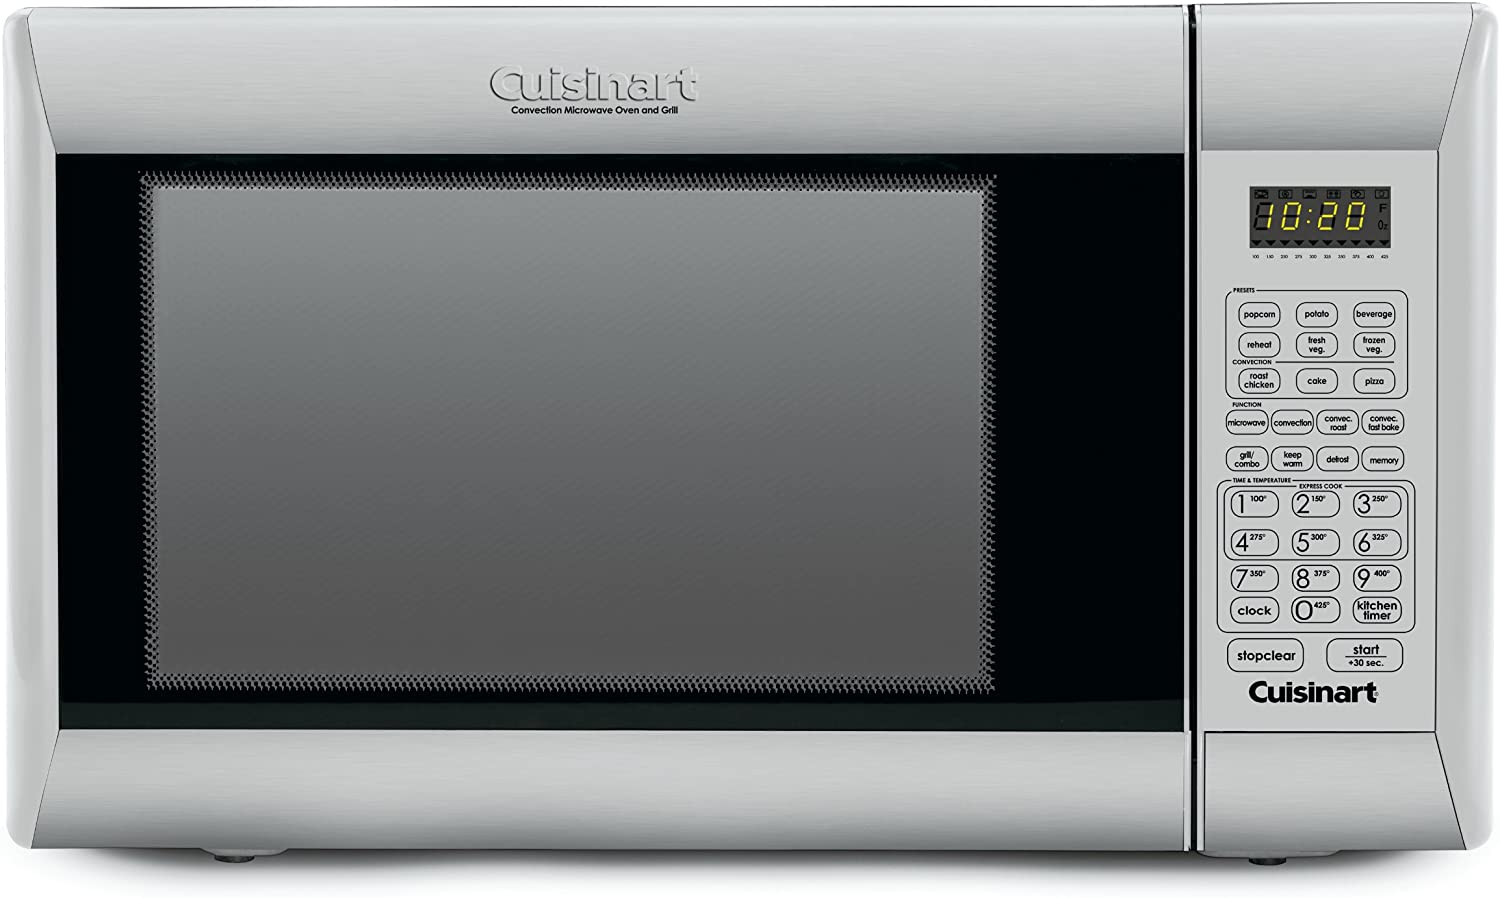 Top 5 Best Convection Microwave Ovens in 2021 Utensils List